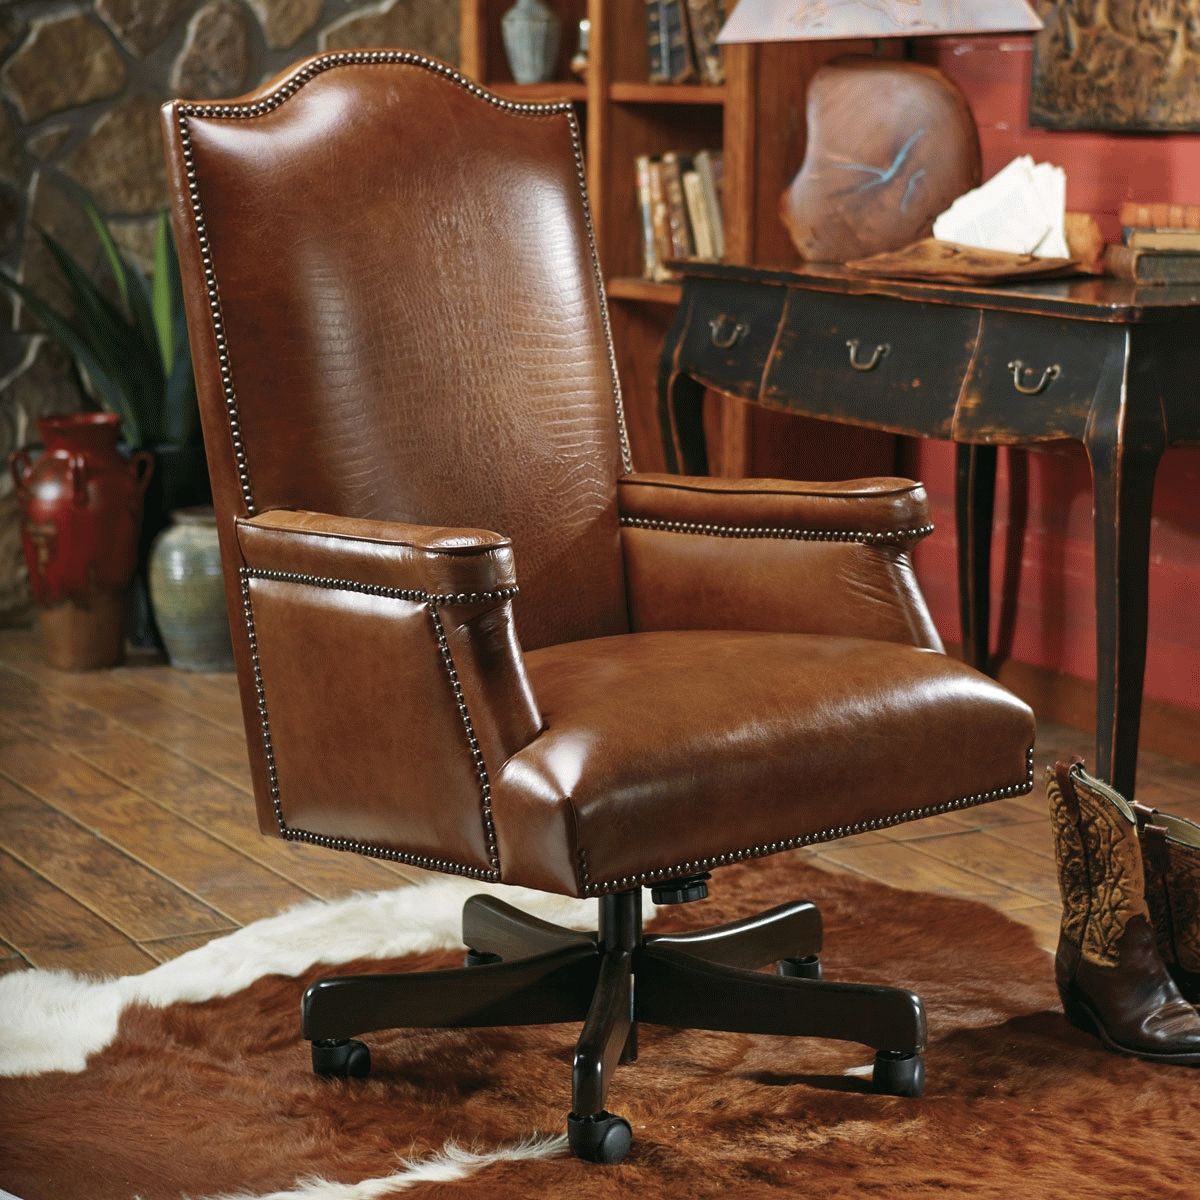 Leather Executive Office Chairs In Latest Baron Executive Chair With Croc Leather (View 9 of 20)